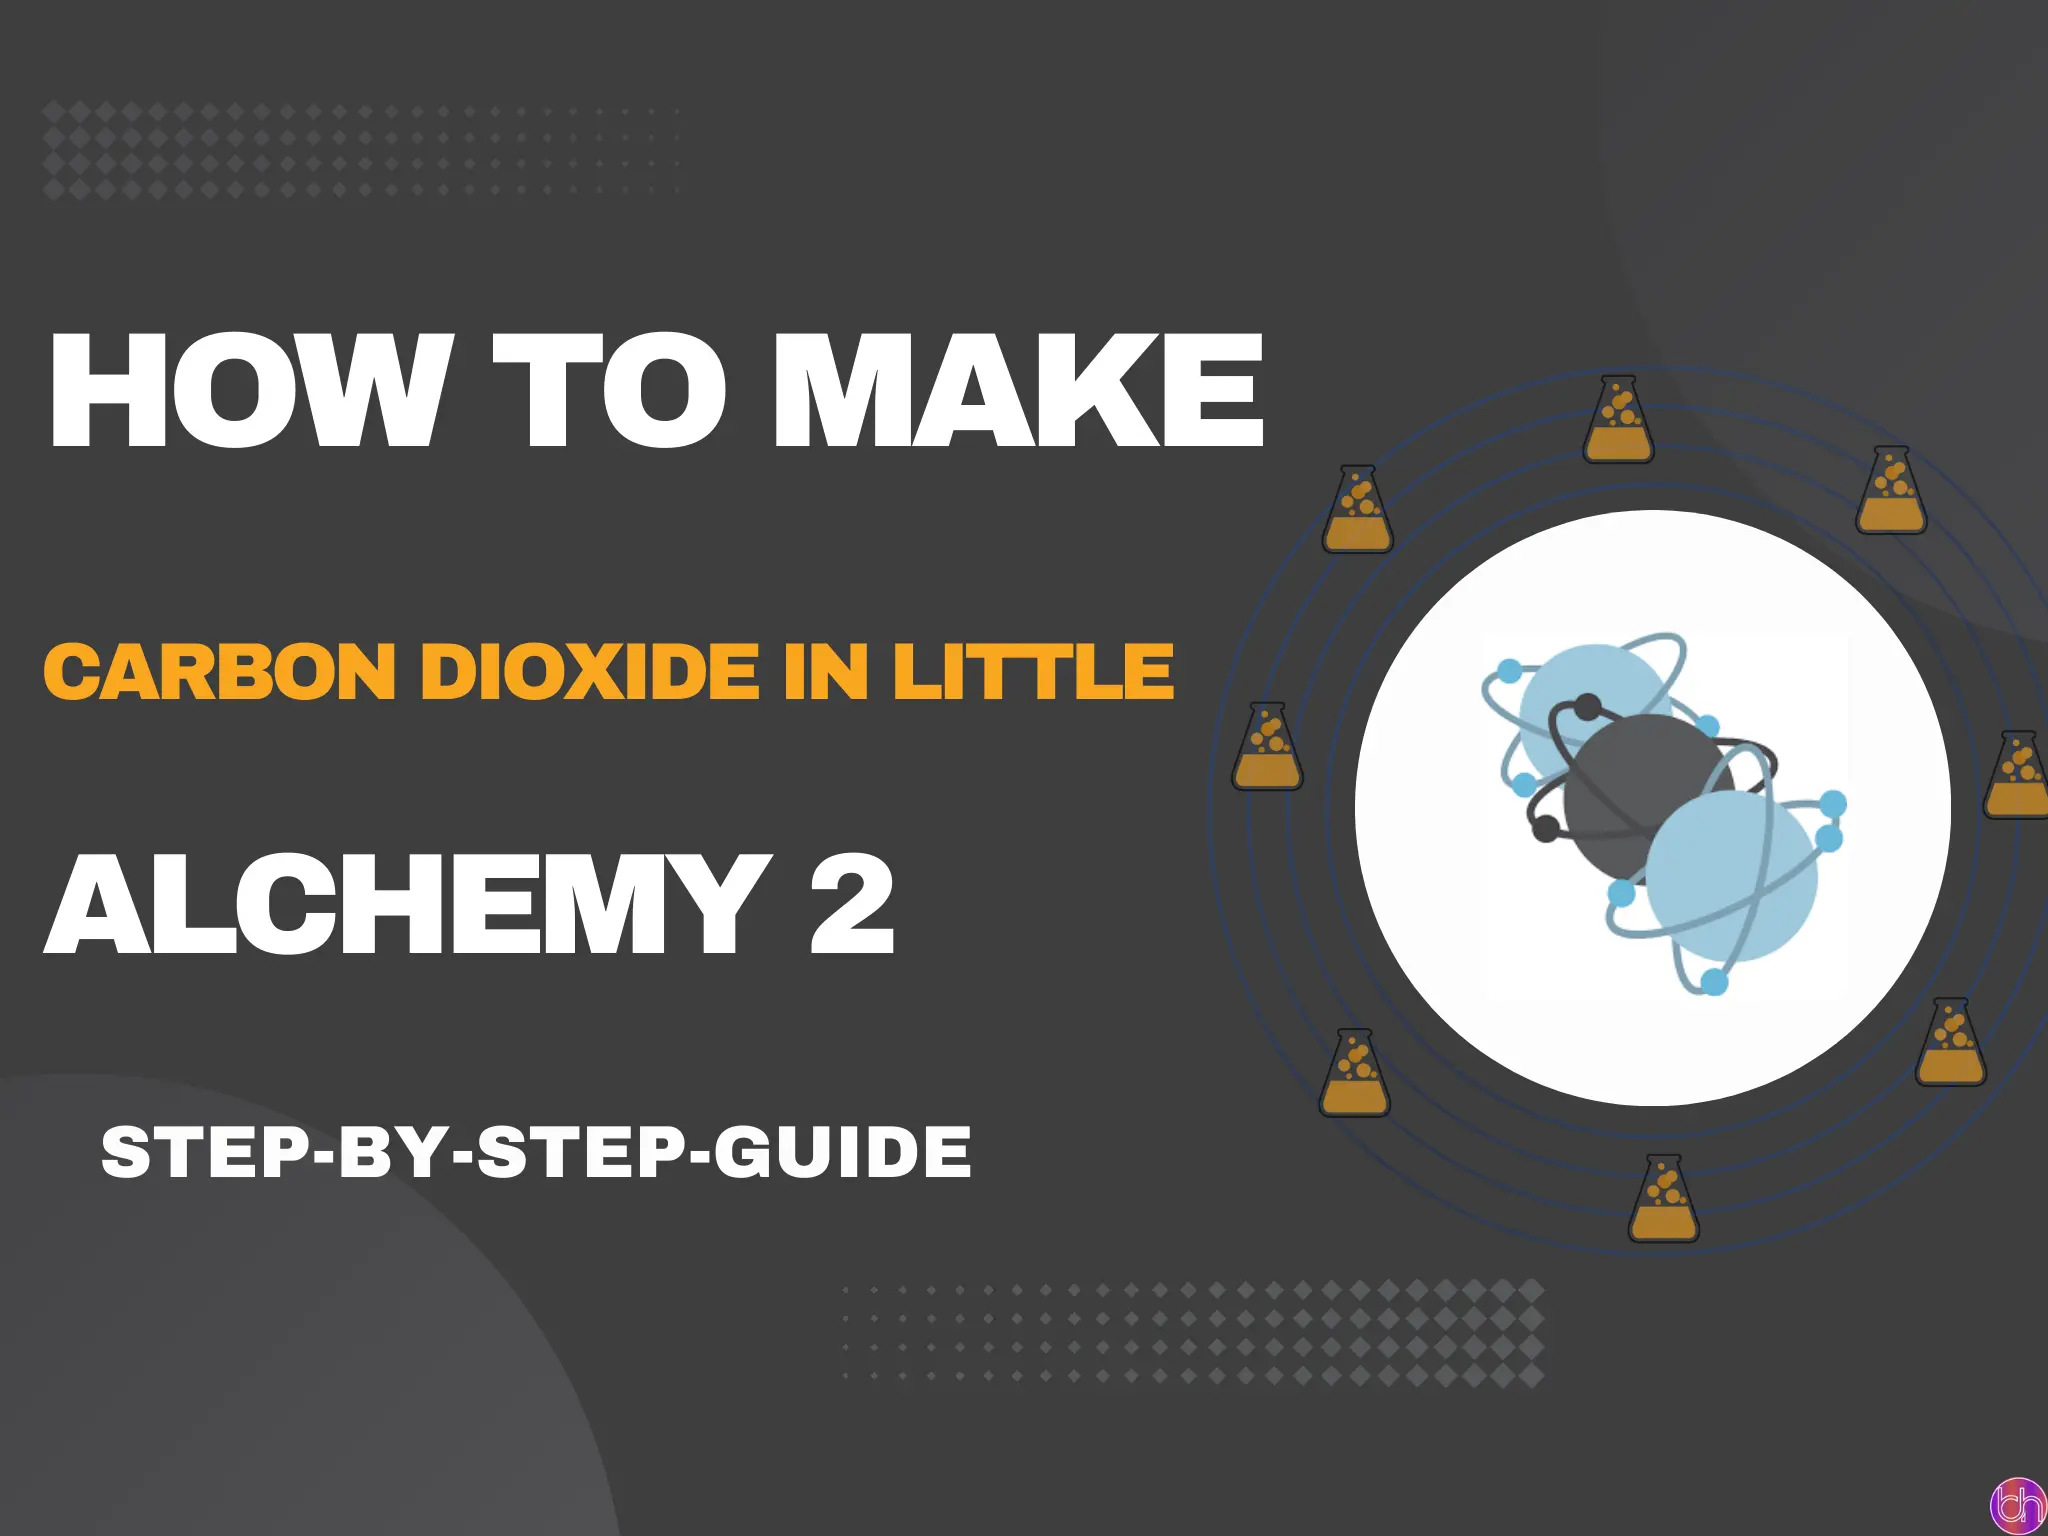 how to make Carbon dioxide in little alchemy 2